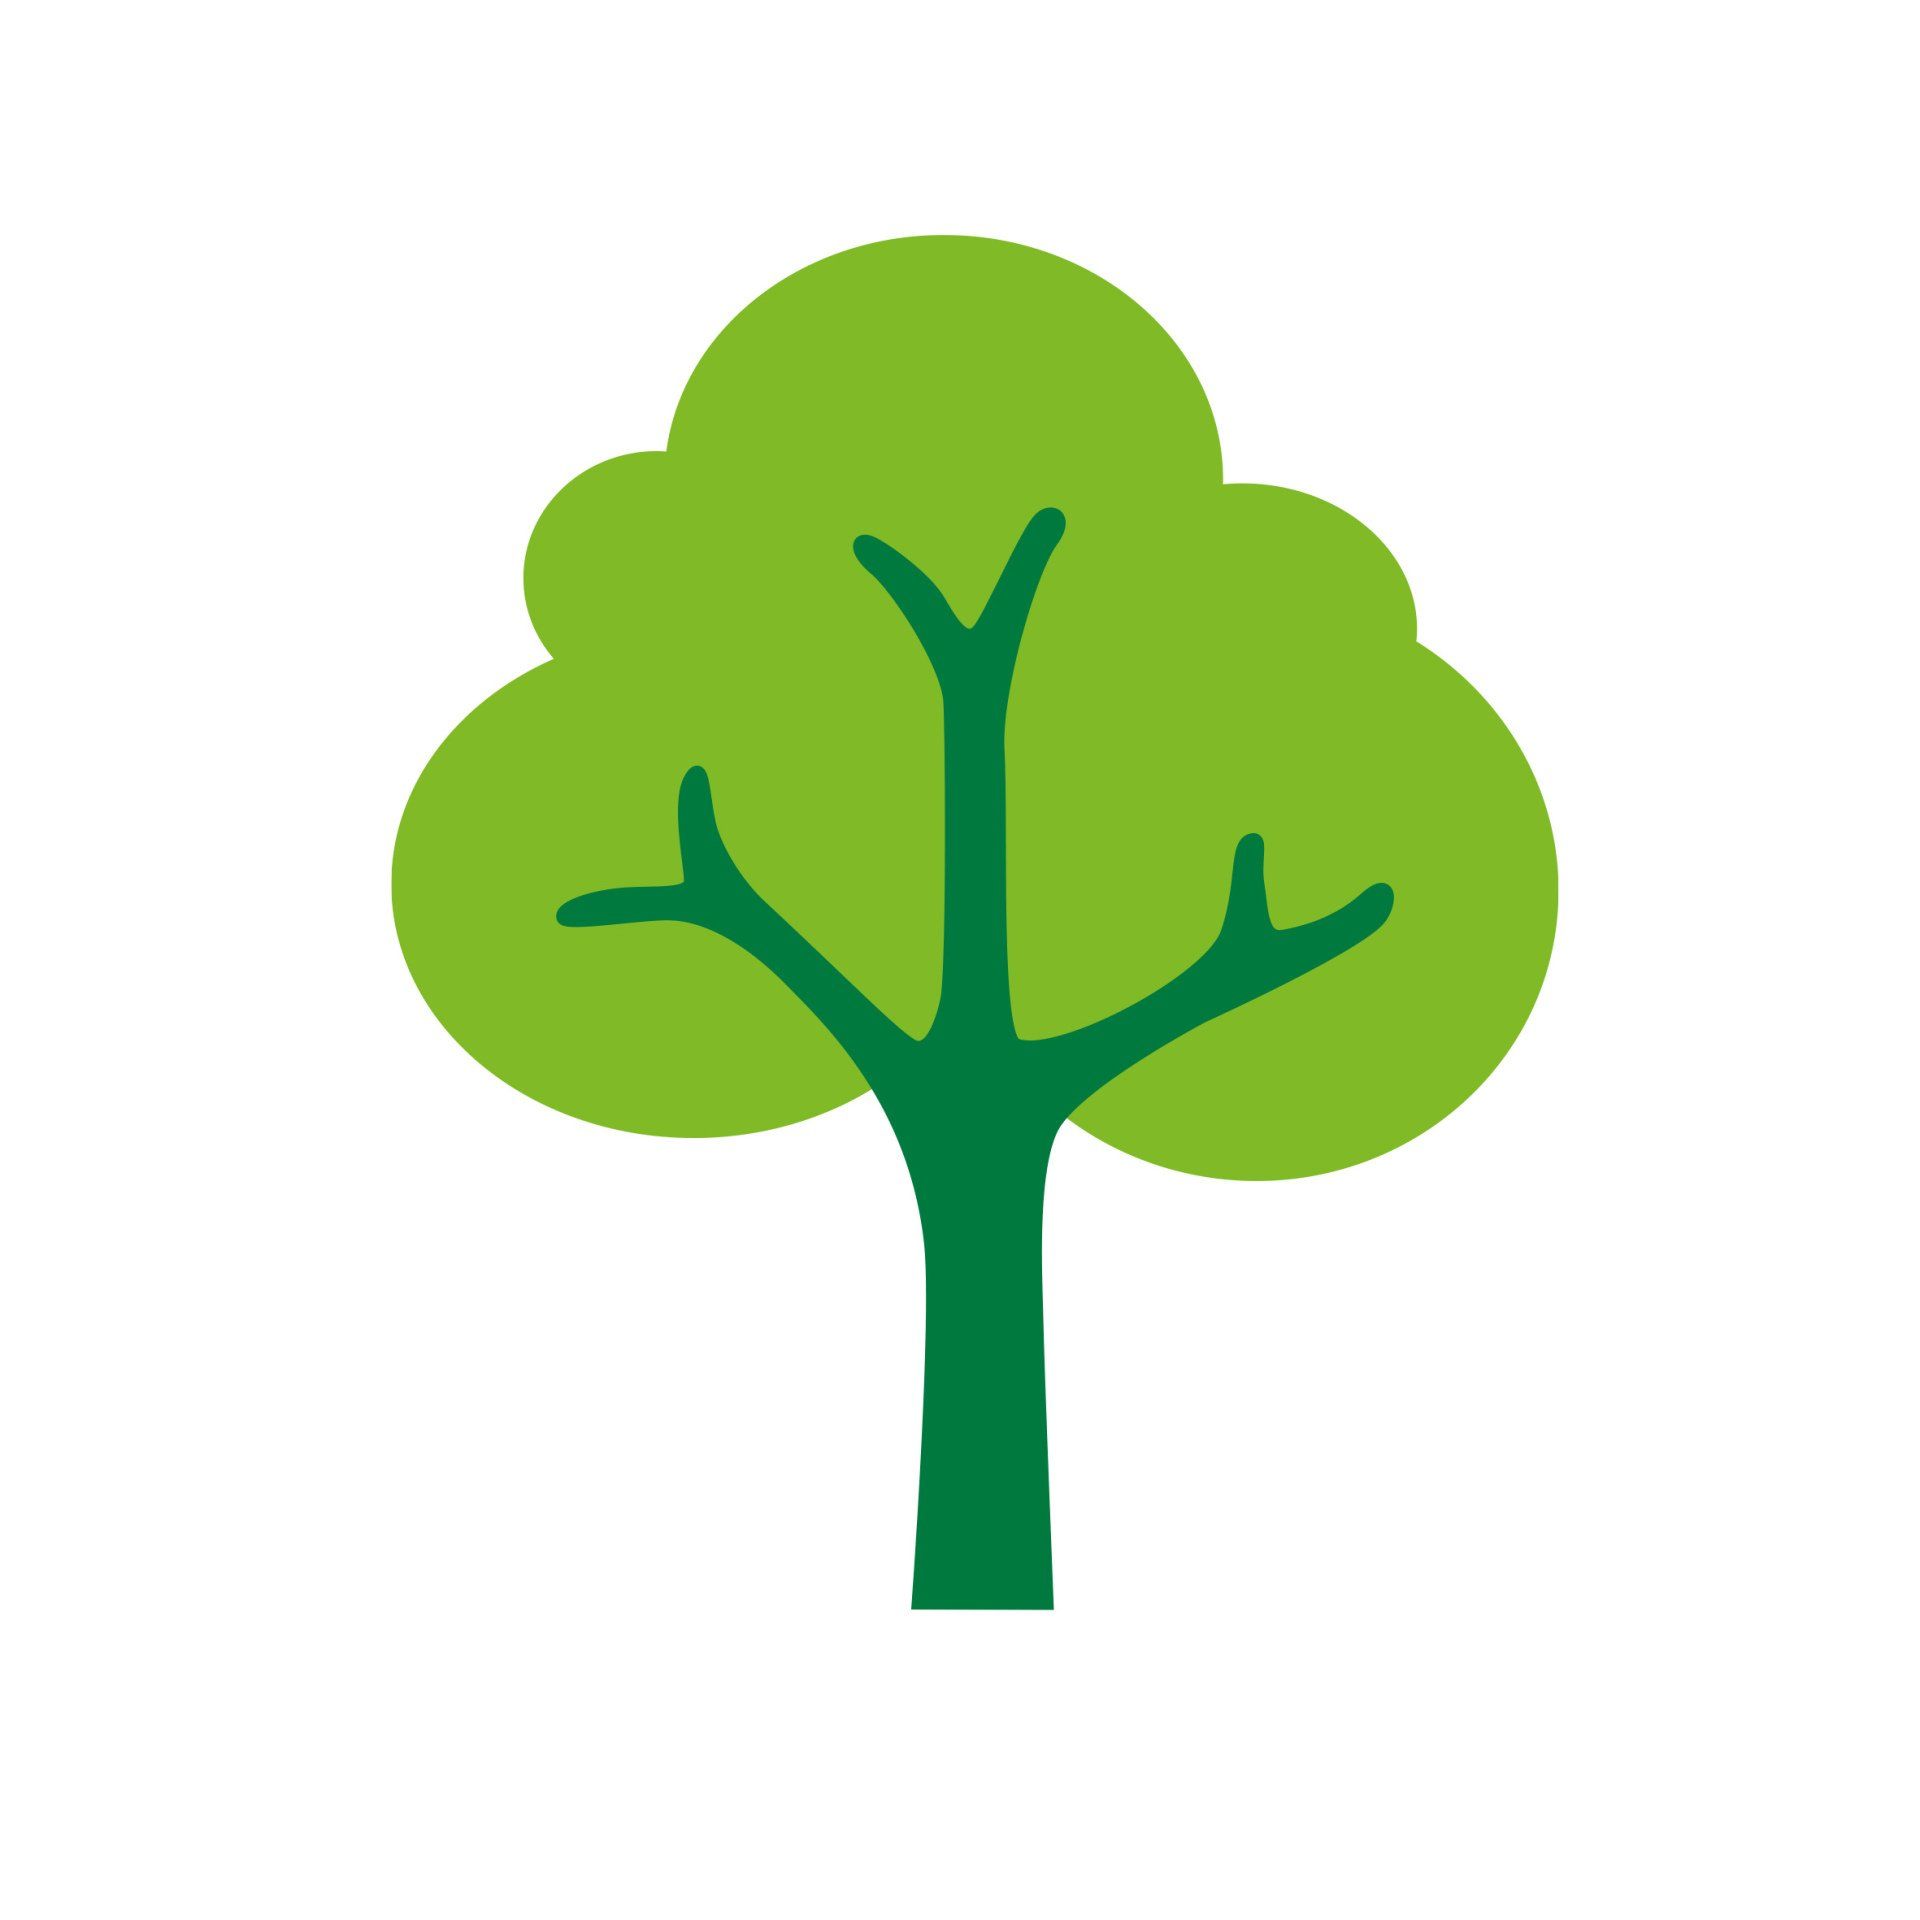 Icon of a tree for Nell Bank's learning through nature education centre